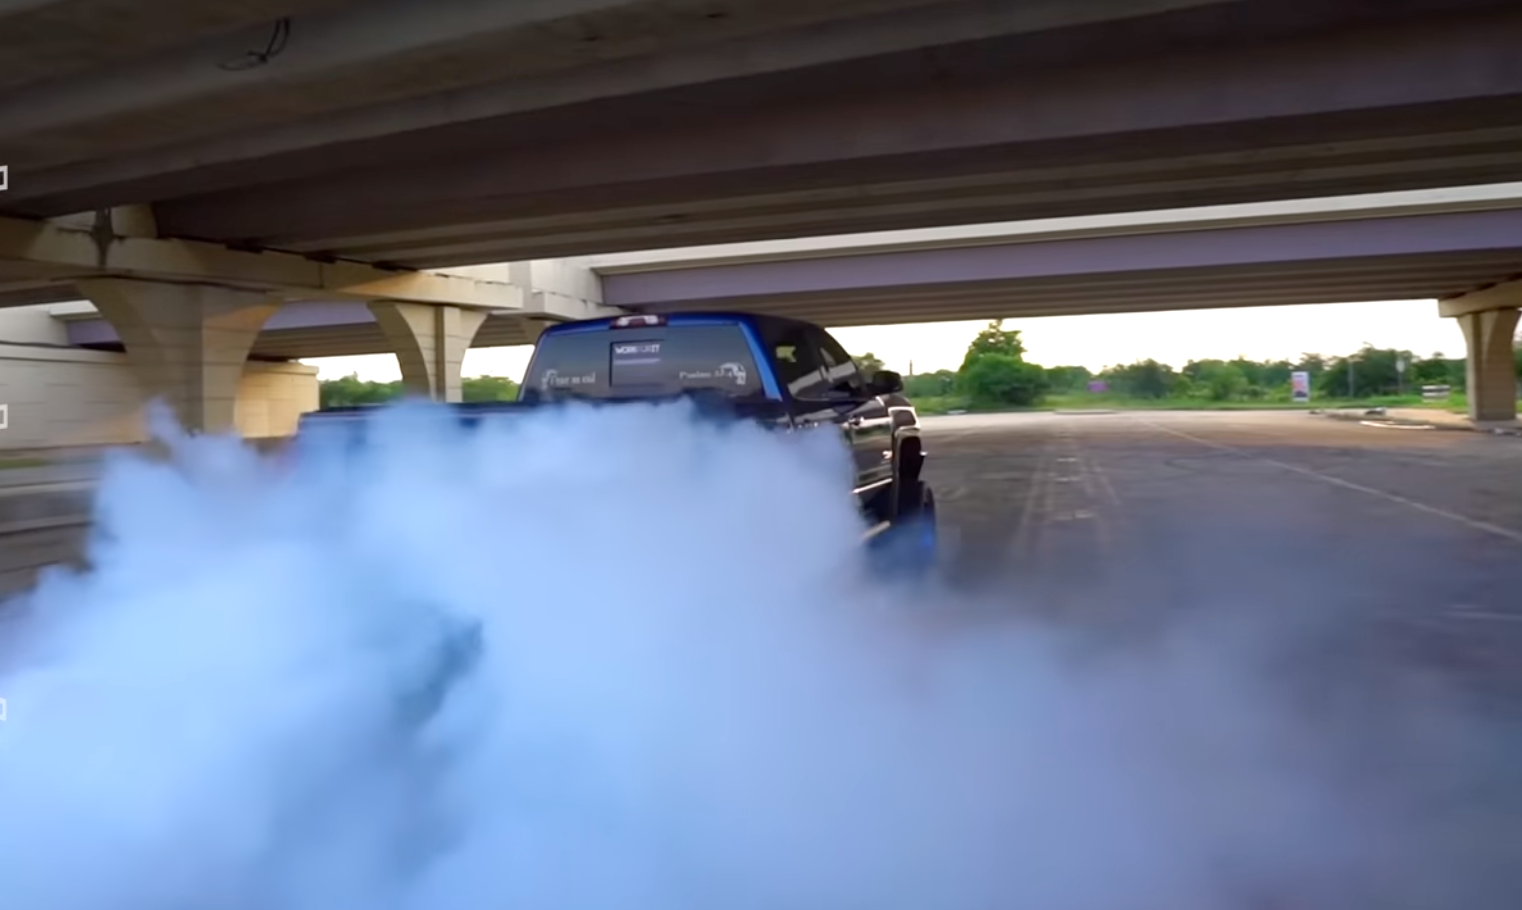 Chevy Silverado with 1,000 hp doing a burnout.